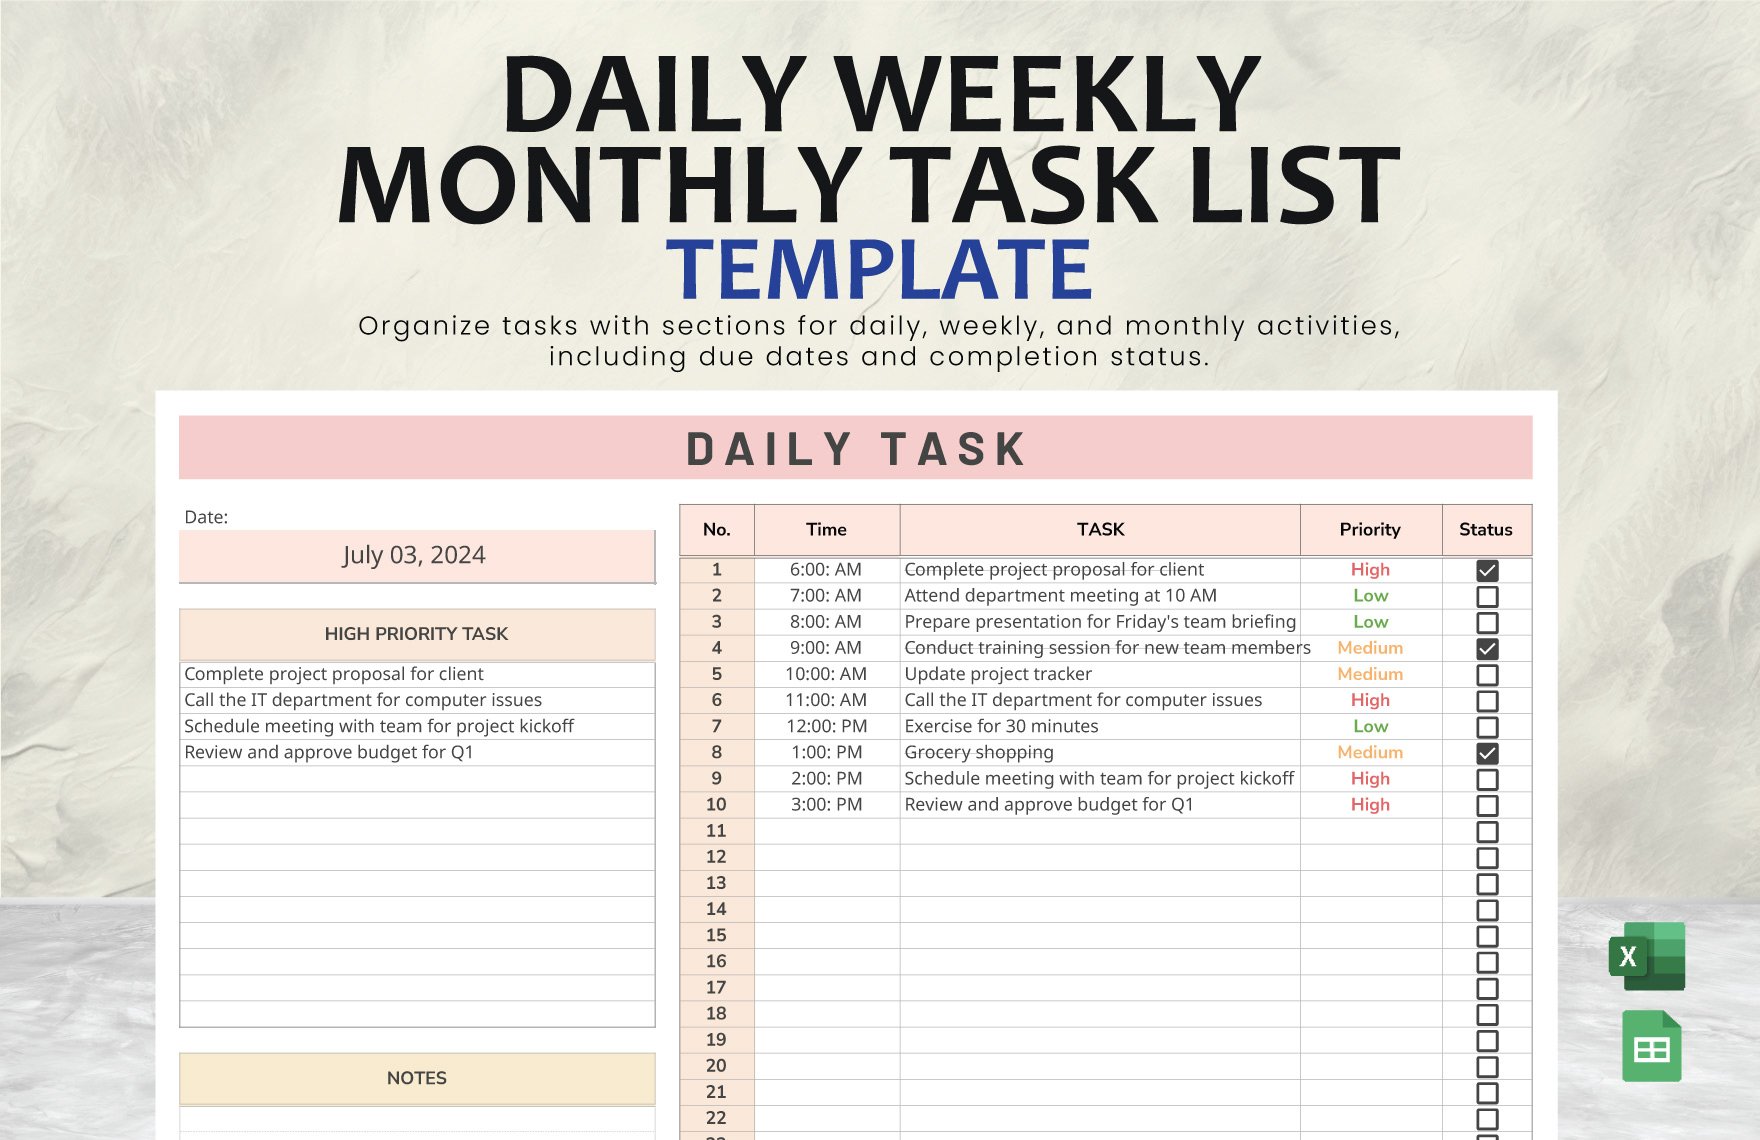 Daily Weekly Monthly Task List Template in Excel, Google Sheets